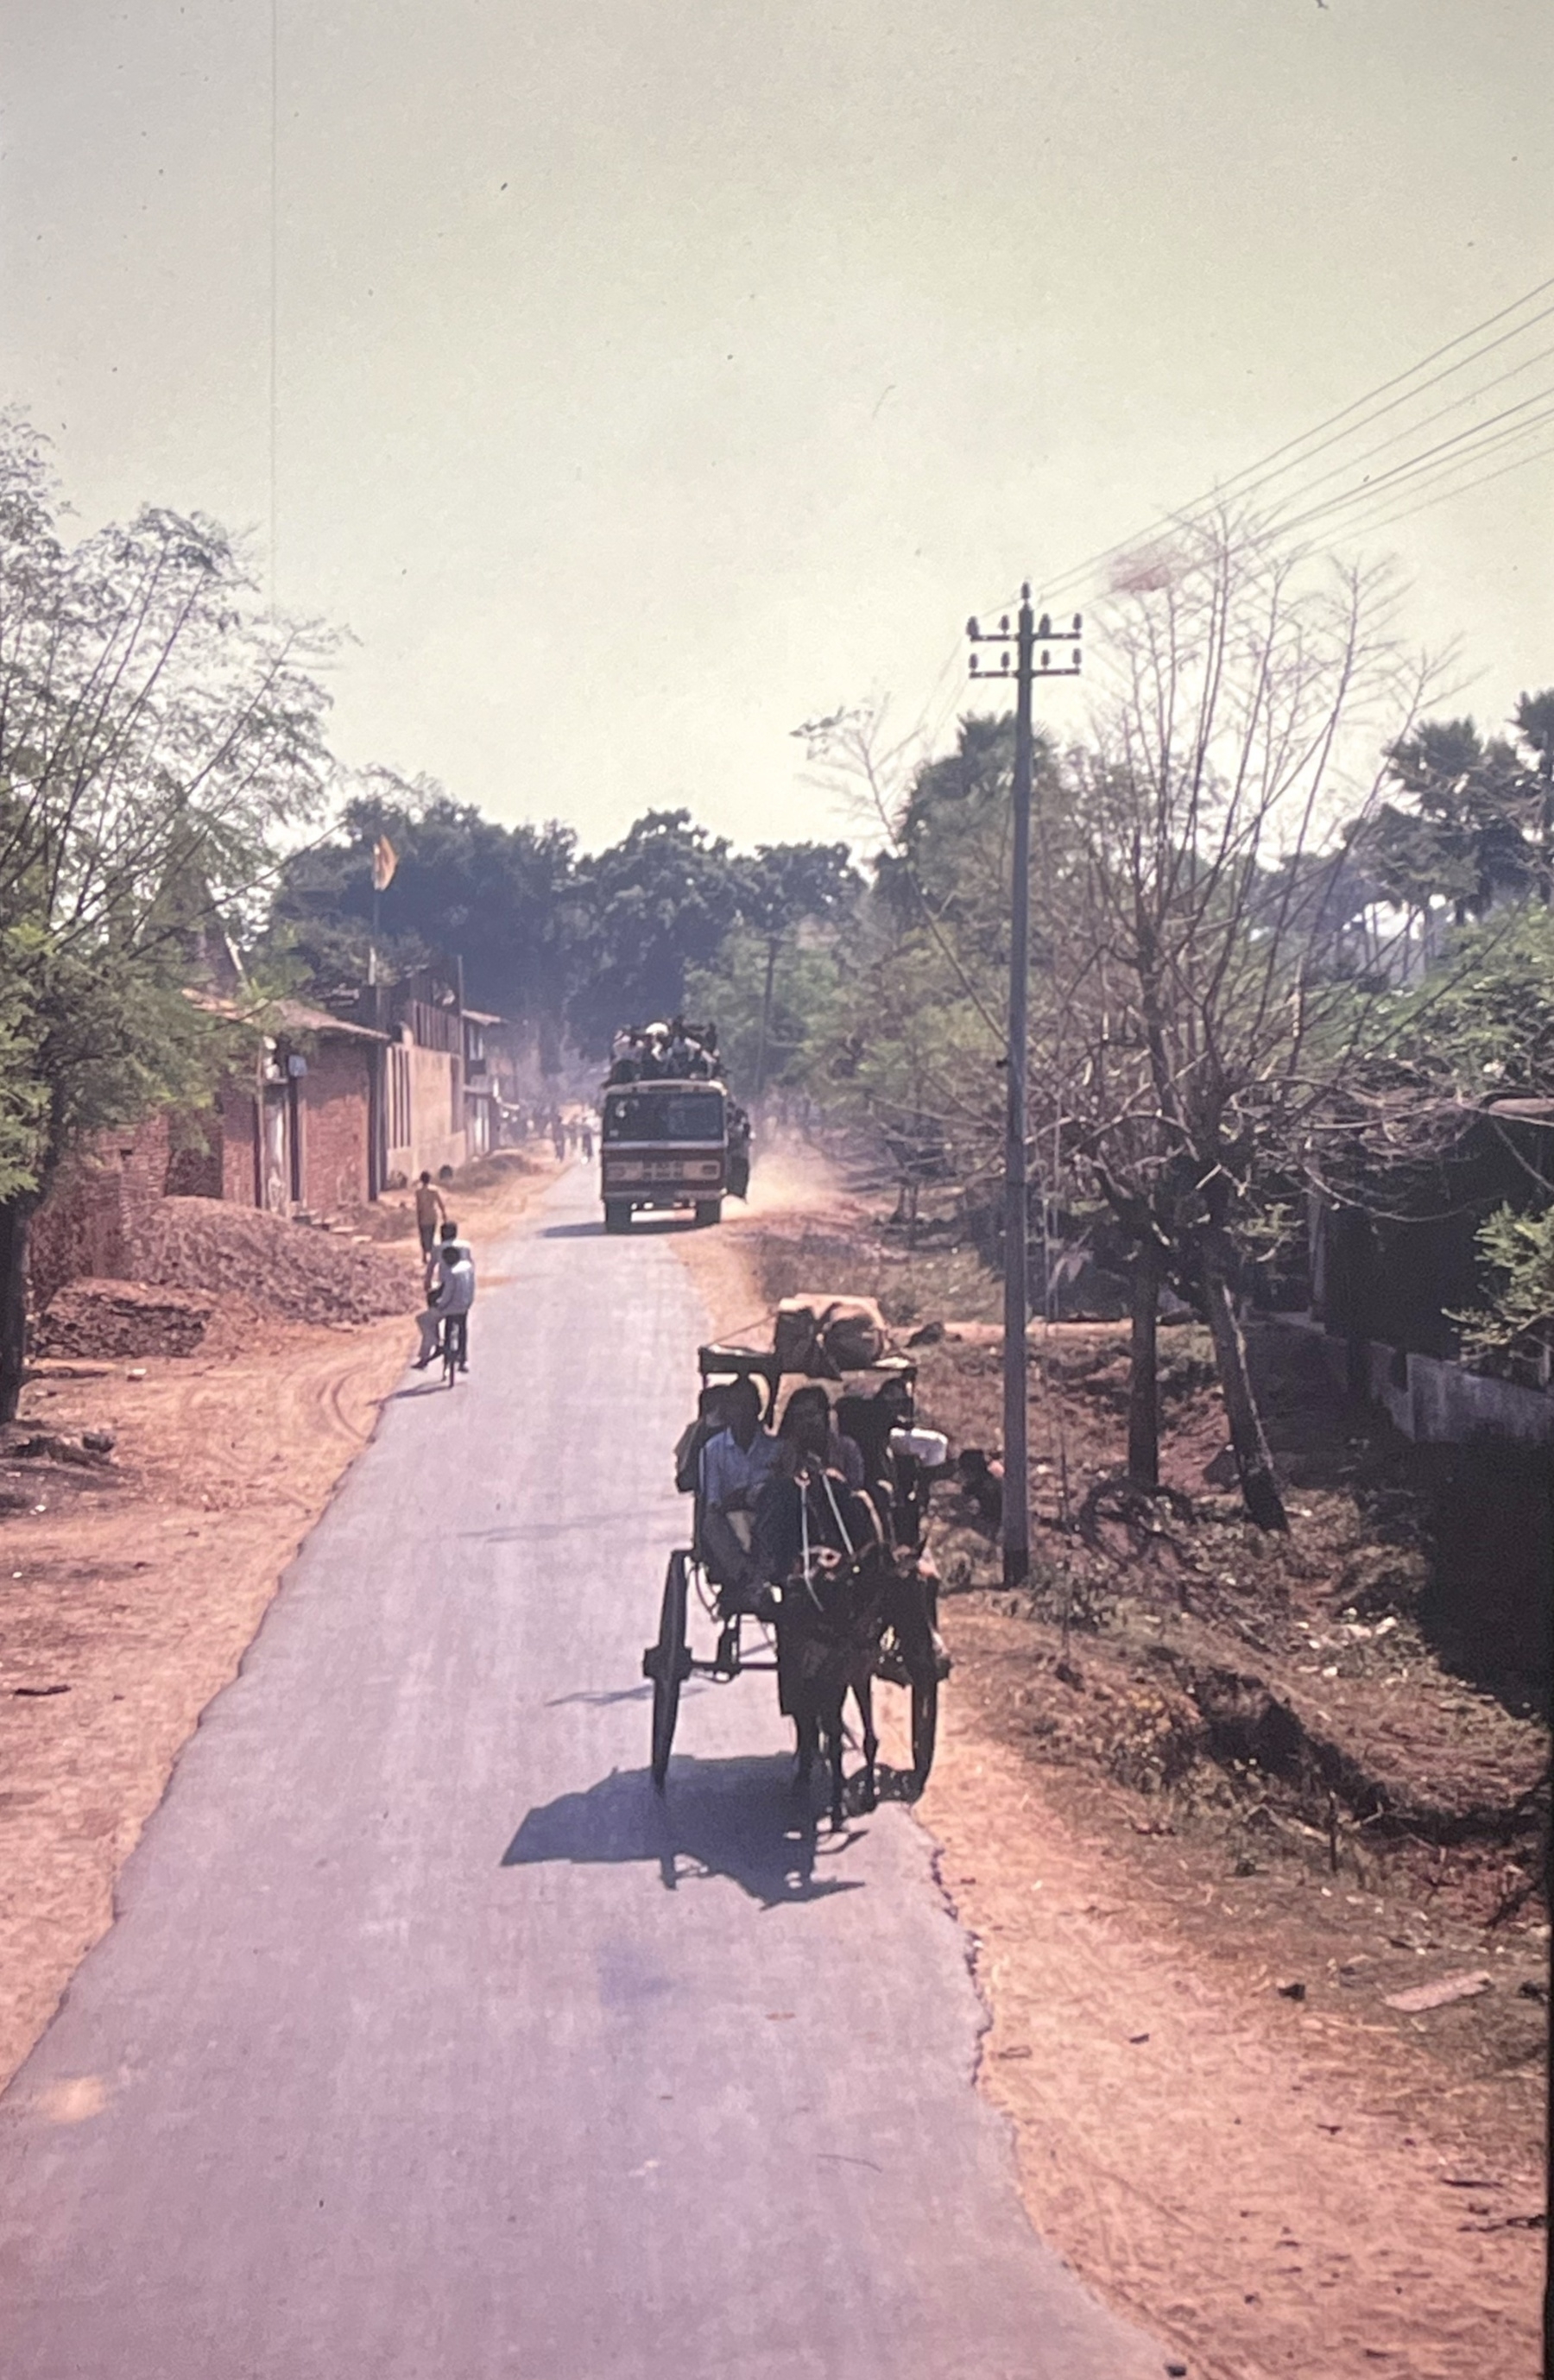 A view from the roof of a moving bus. A small paved road in India. On either side is brown dust and trees. Buildings and maybe a temple are visible on the left. Directly behind the bus is donkey drawn buggy with a few people in and good on the roof. Behind that a little ways off is a bus with people and luggage sitting on the roof. The bus is half in the dirt, half on the road. Going in the opposite direction is a bicycle with someone riding on the back. People can be seen in the background. A telegraph pole and wires run down the righthand side of the road